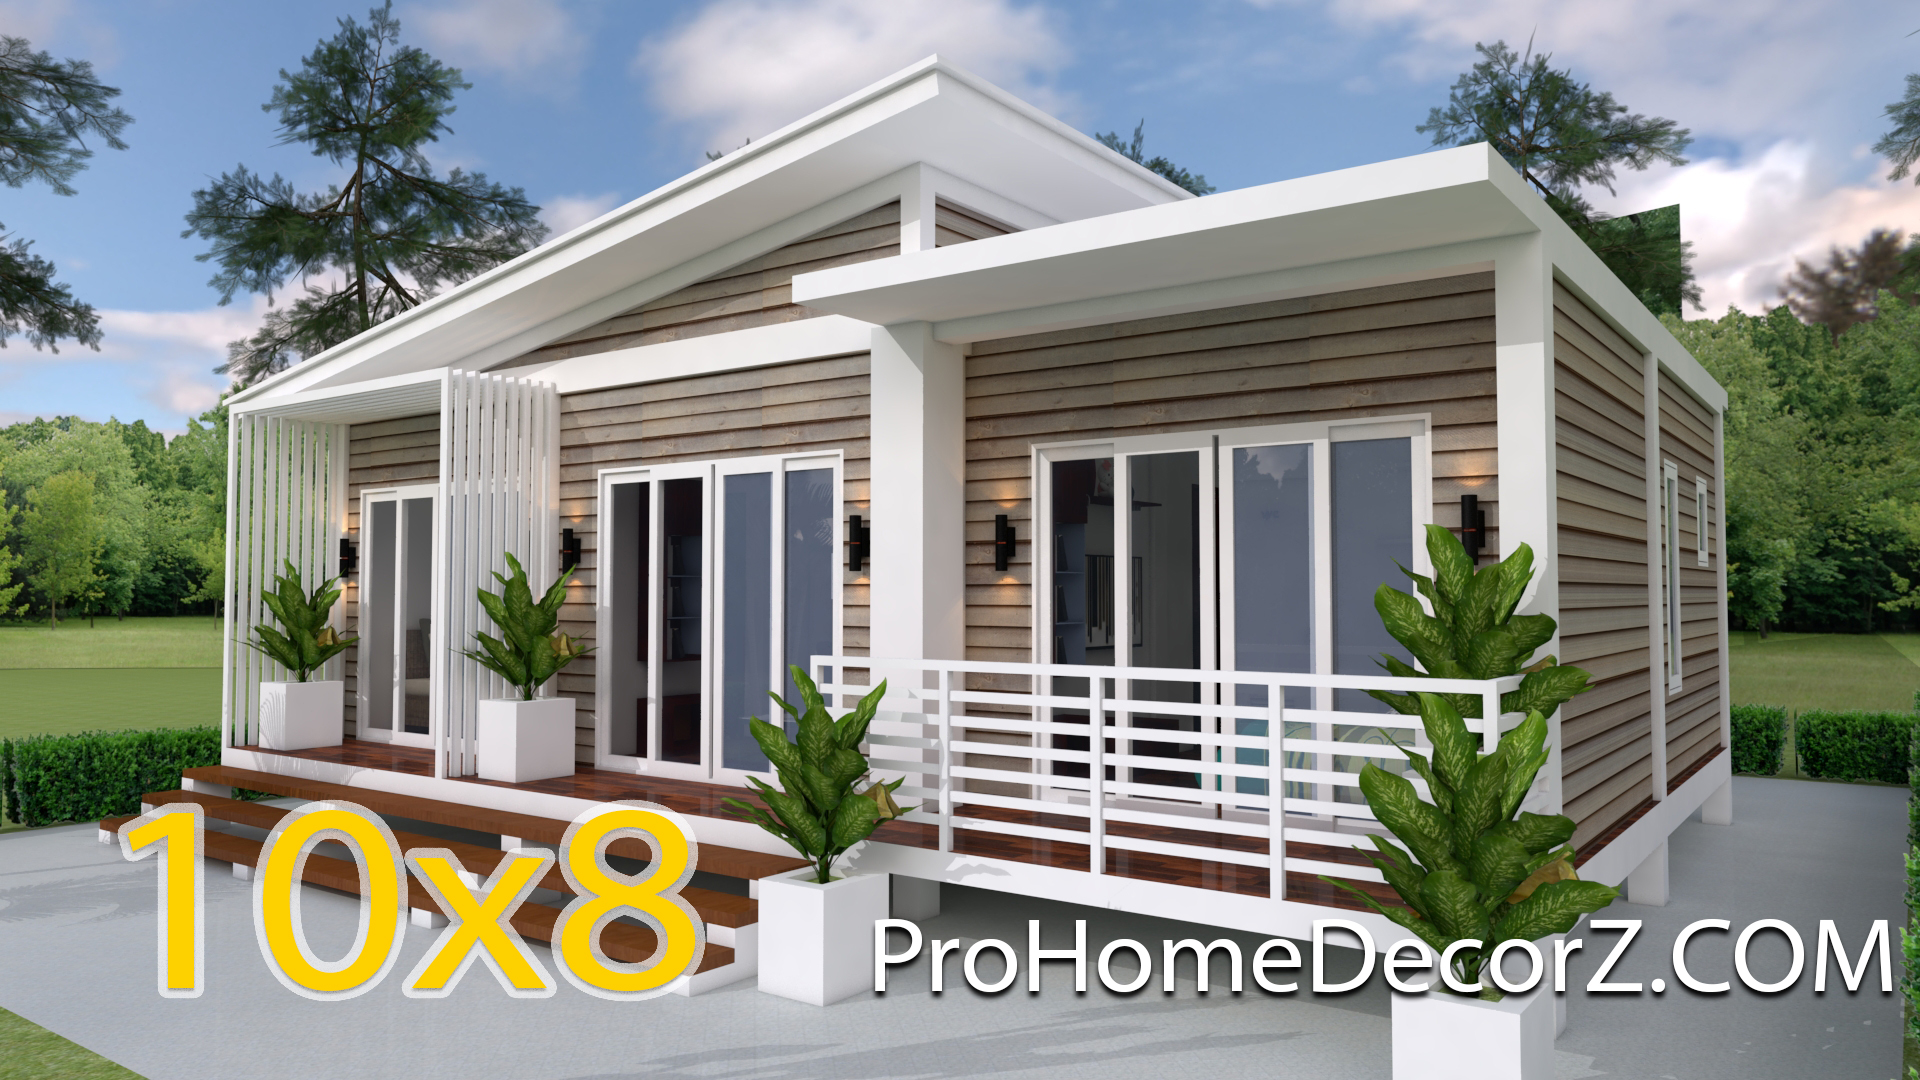 One Story House Plans 10x8 Meter 33x26 Feet